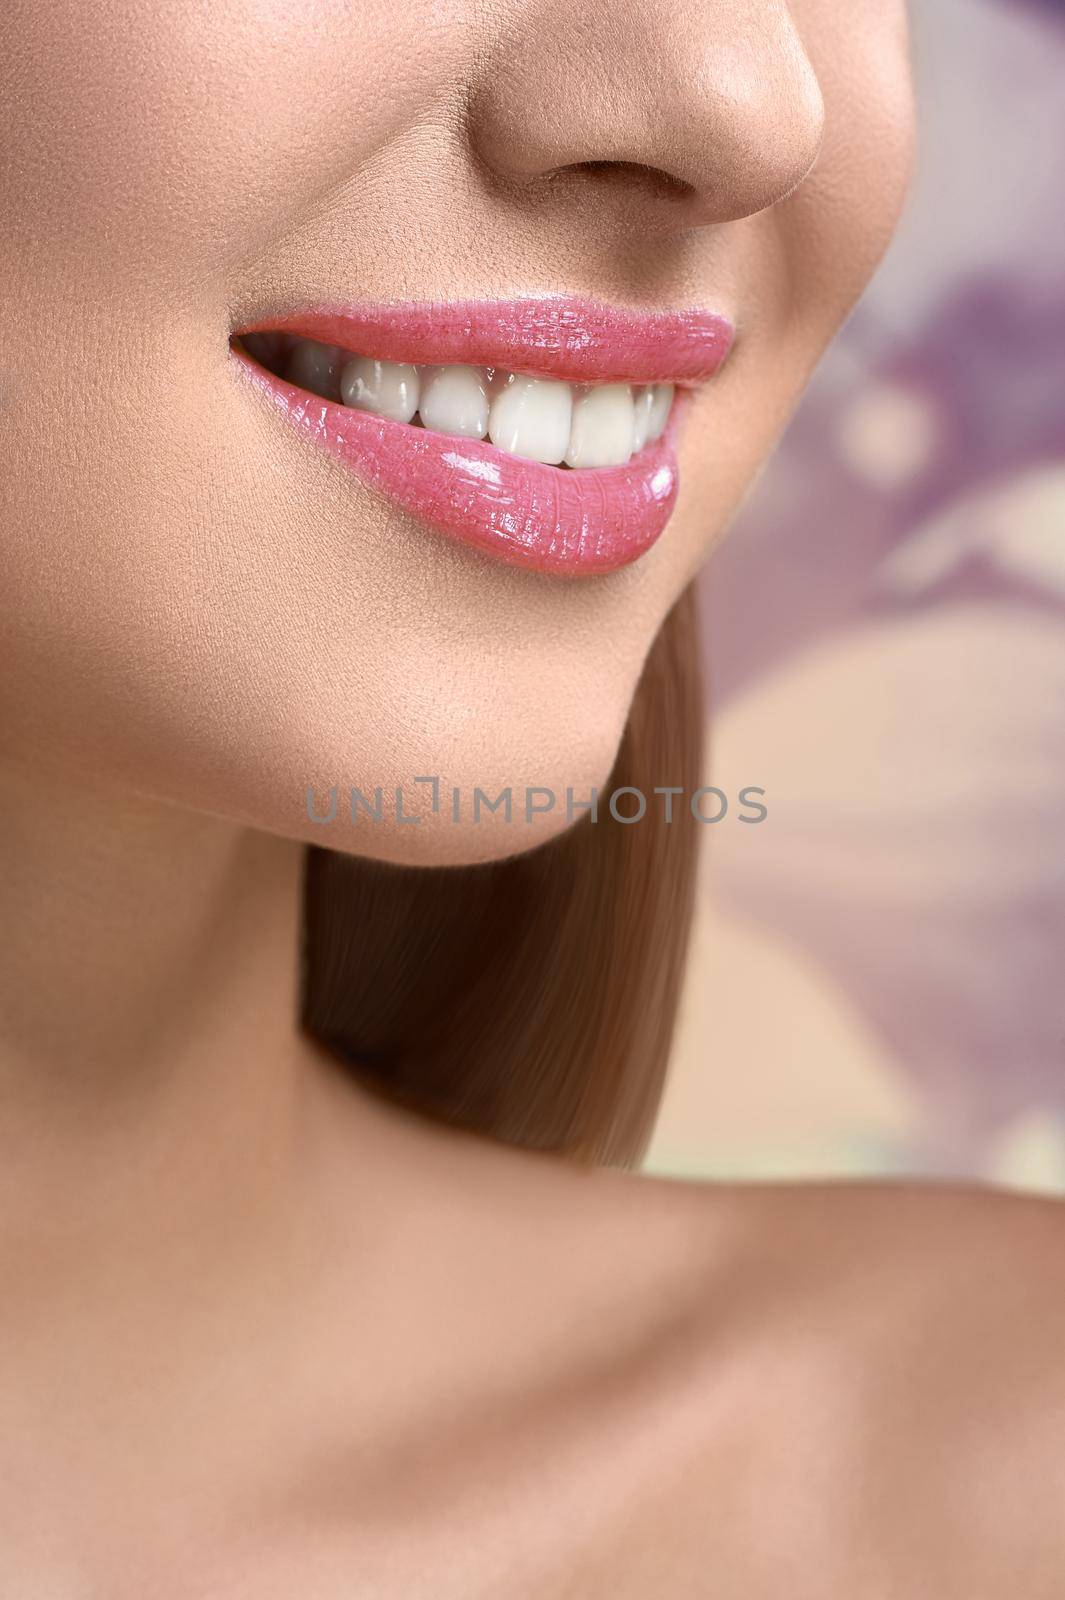 Glossy smile. Vertical close up of a perfect white healthy smile of a woman with beautiful teeth and full lips covered in pink lip gloss cosmetology beautician treatment products advertising concept